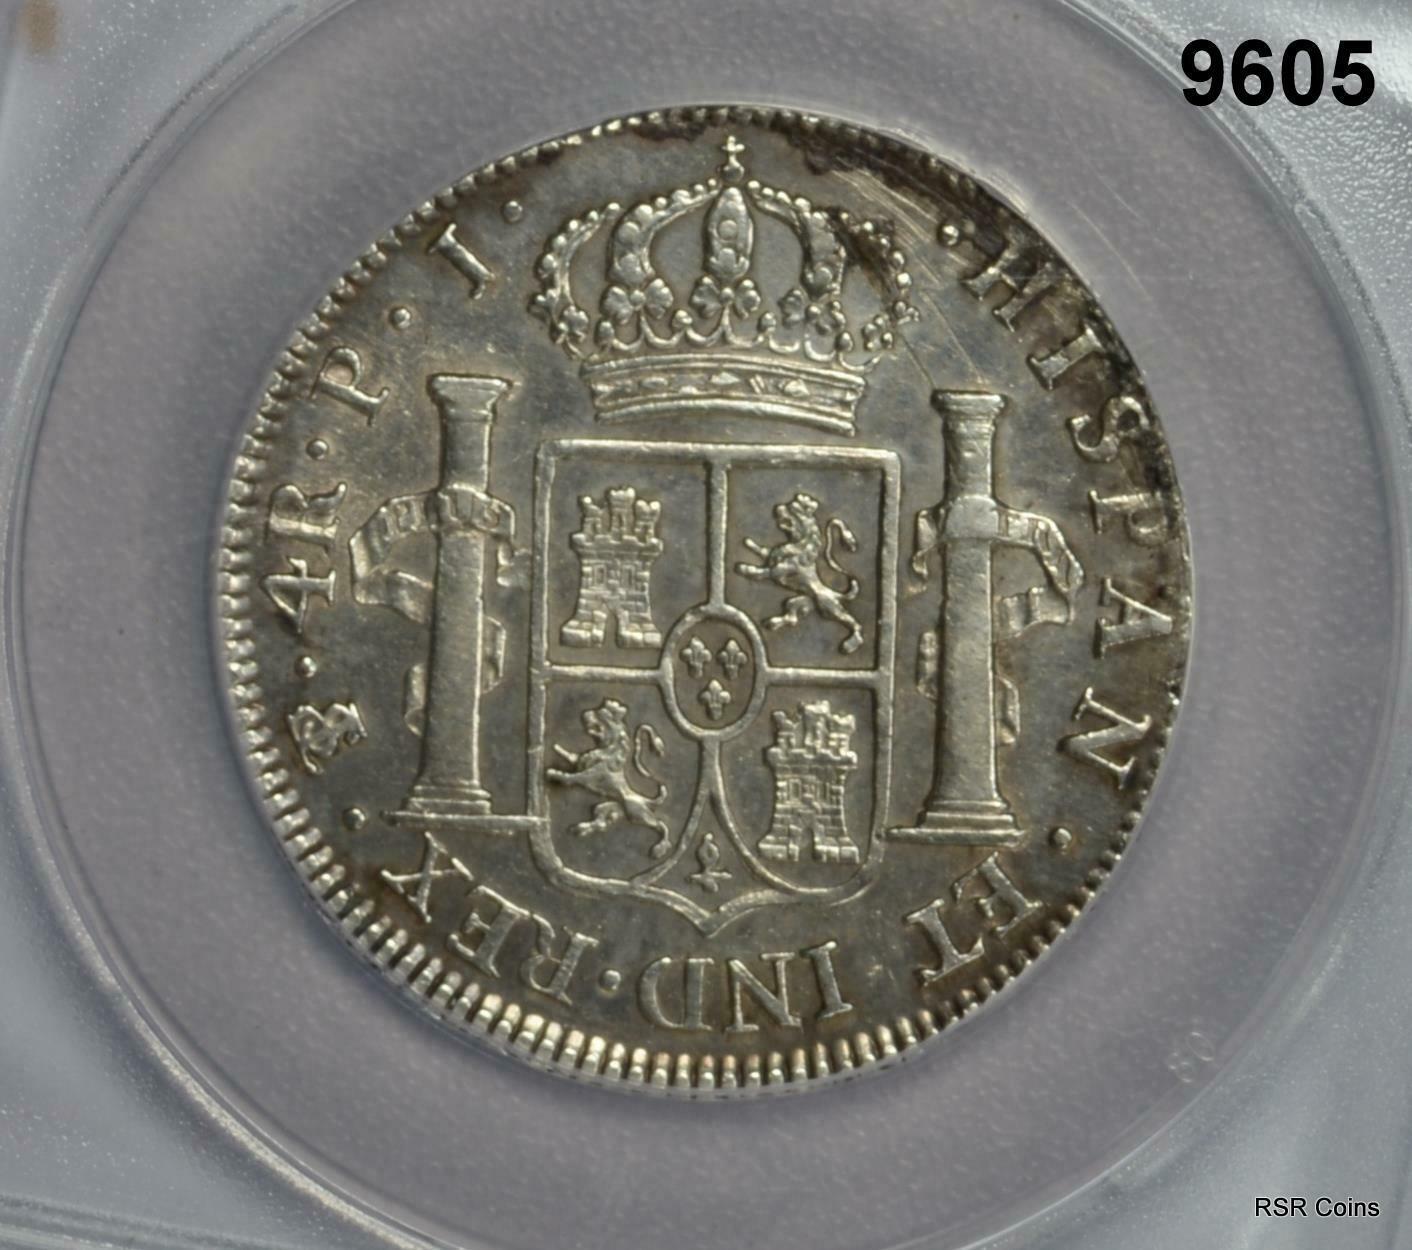 1807-P, PJ BOLIVIA 4 REALES ANACS CERTIFIED EF45 CORRODED TOOLED CLEANED #9605